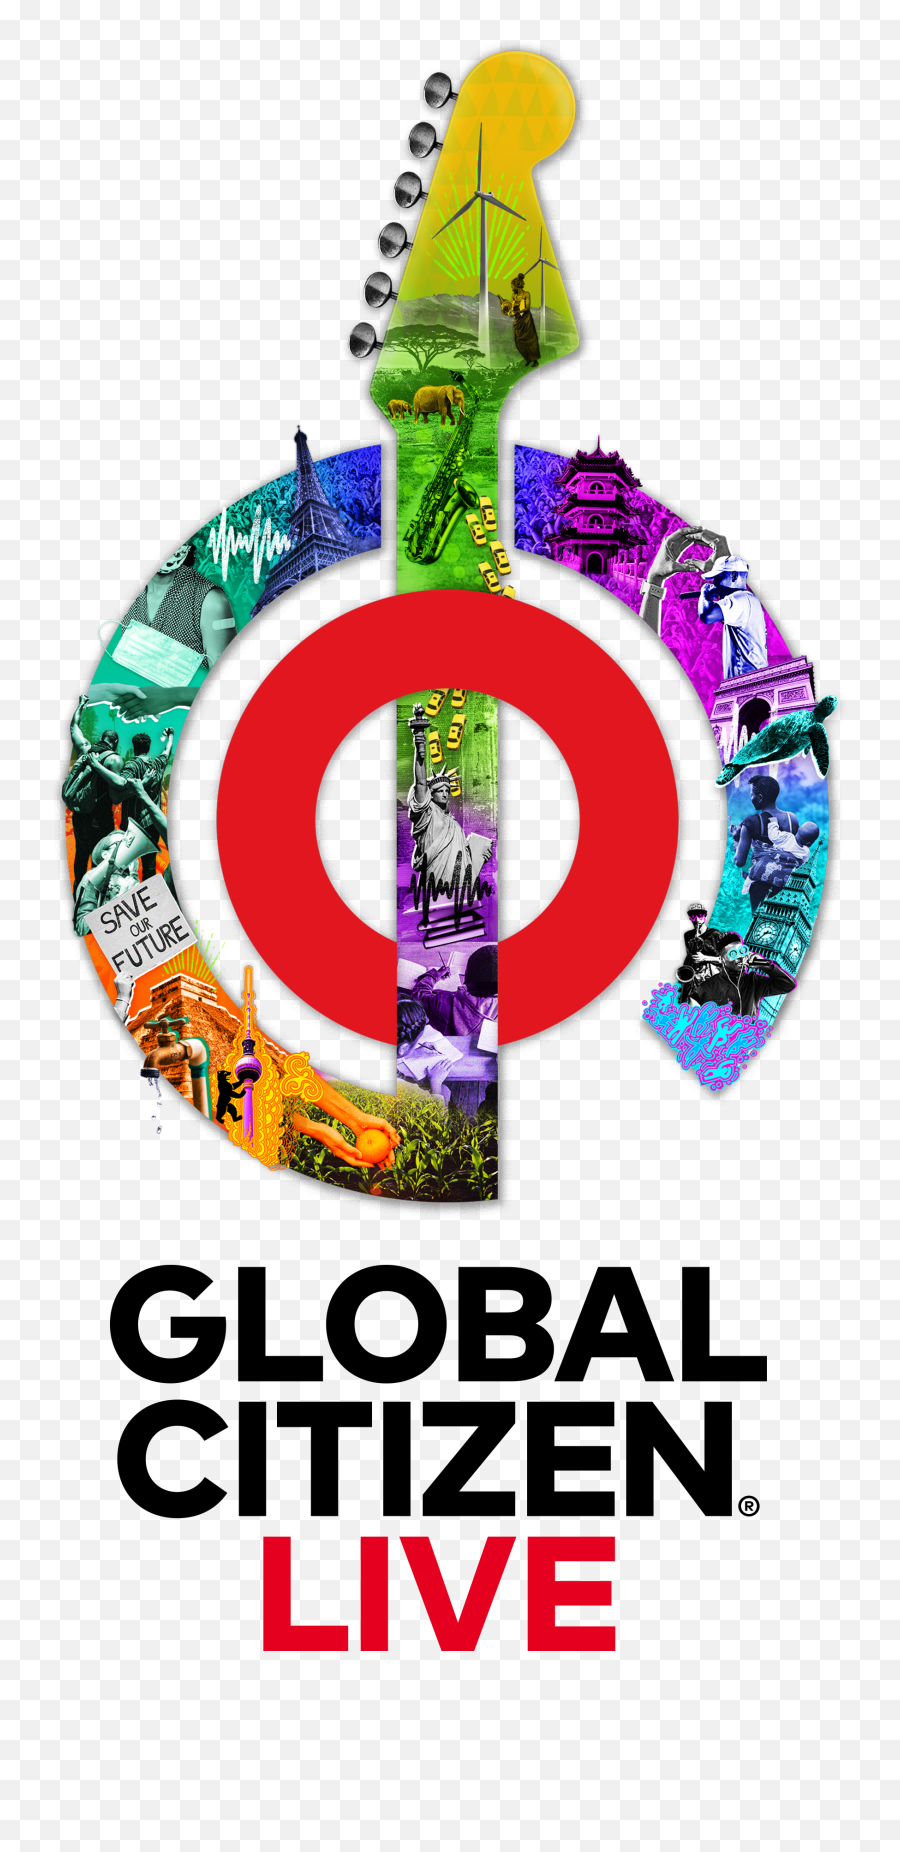 Global Citizen Live Announces Broadcast Performances From Emoji,Dont Send.my Girlfriend Heart Emoticons